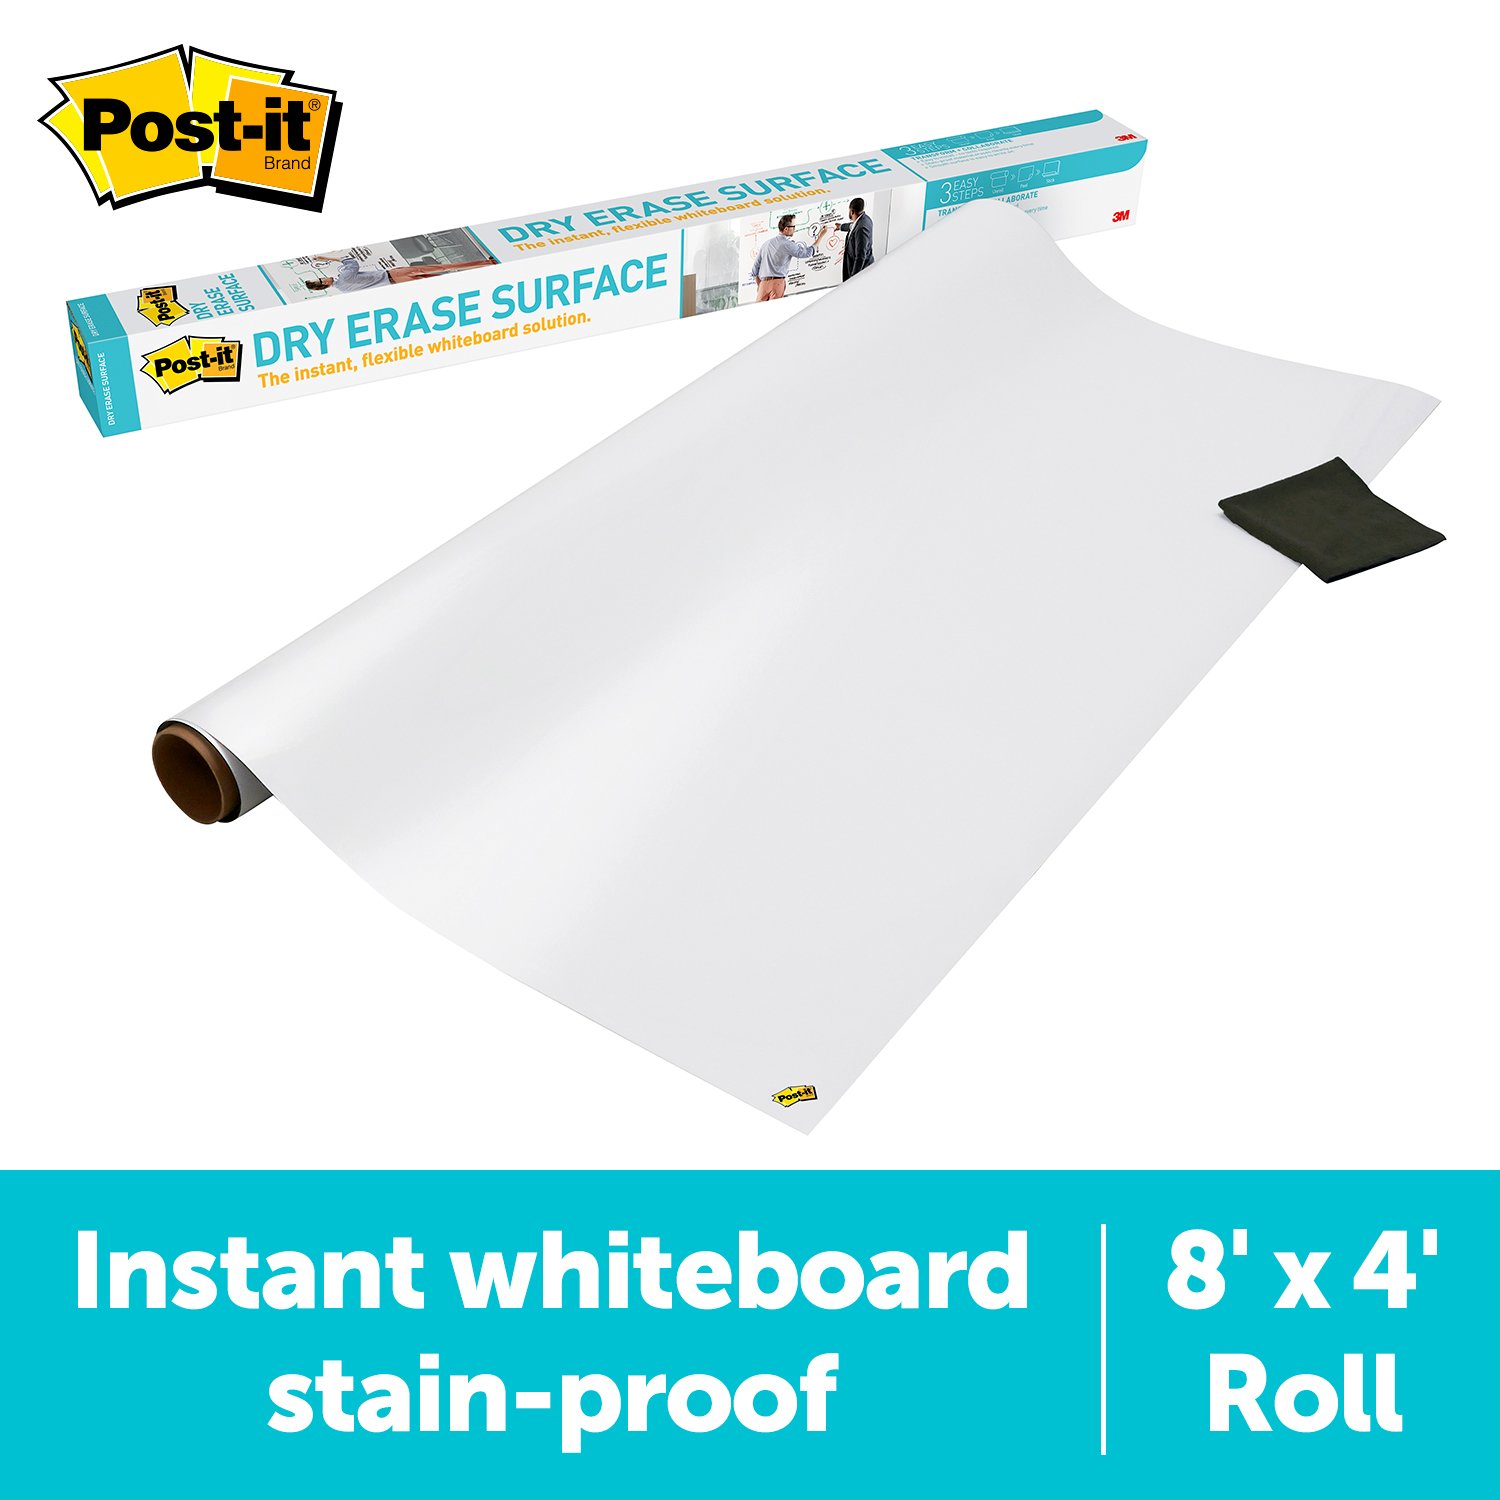 7100220643 - Post-it Dry Erase Surface DEF8x4, 4 ft x 2.66 yd (1.21 m x 2.43 m)